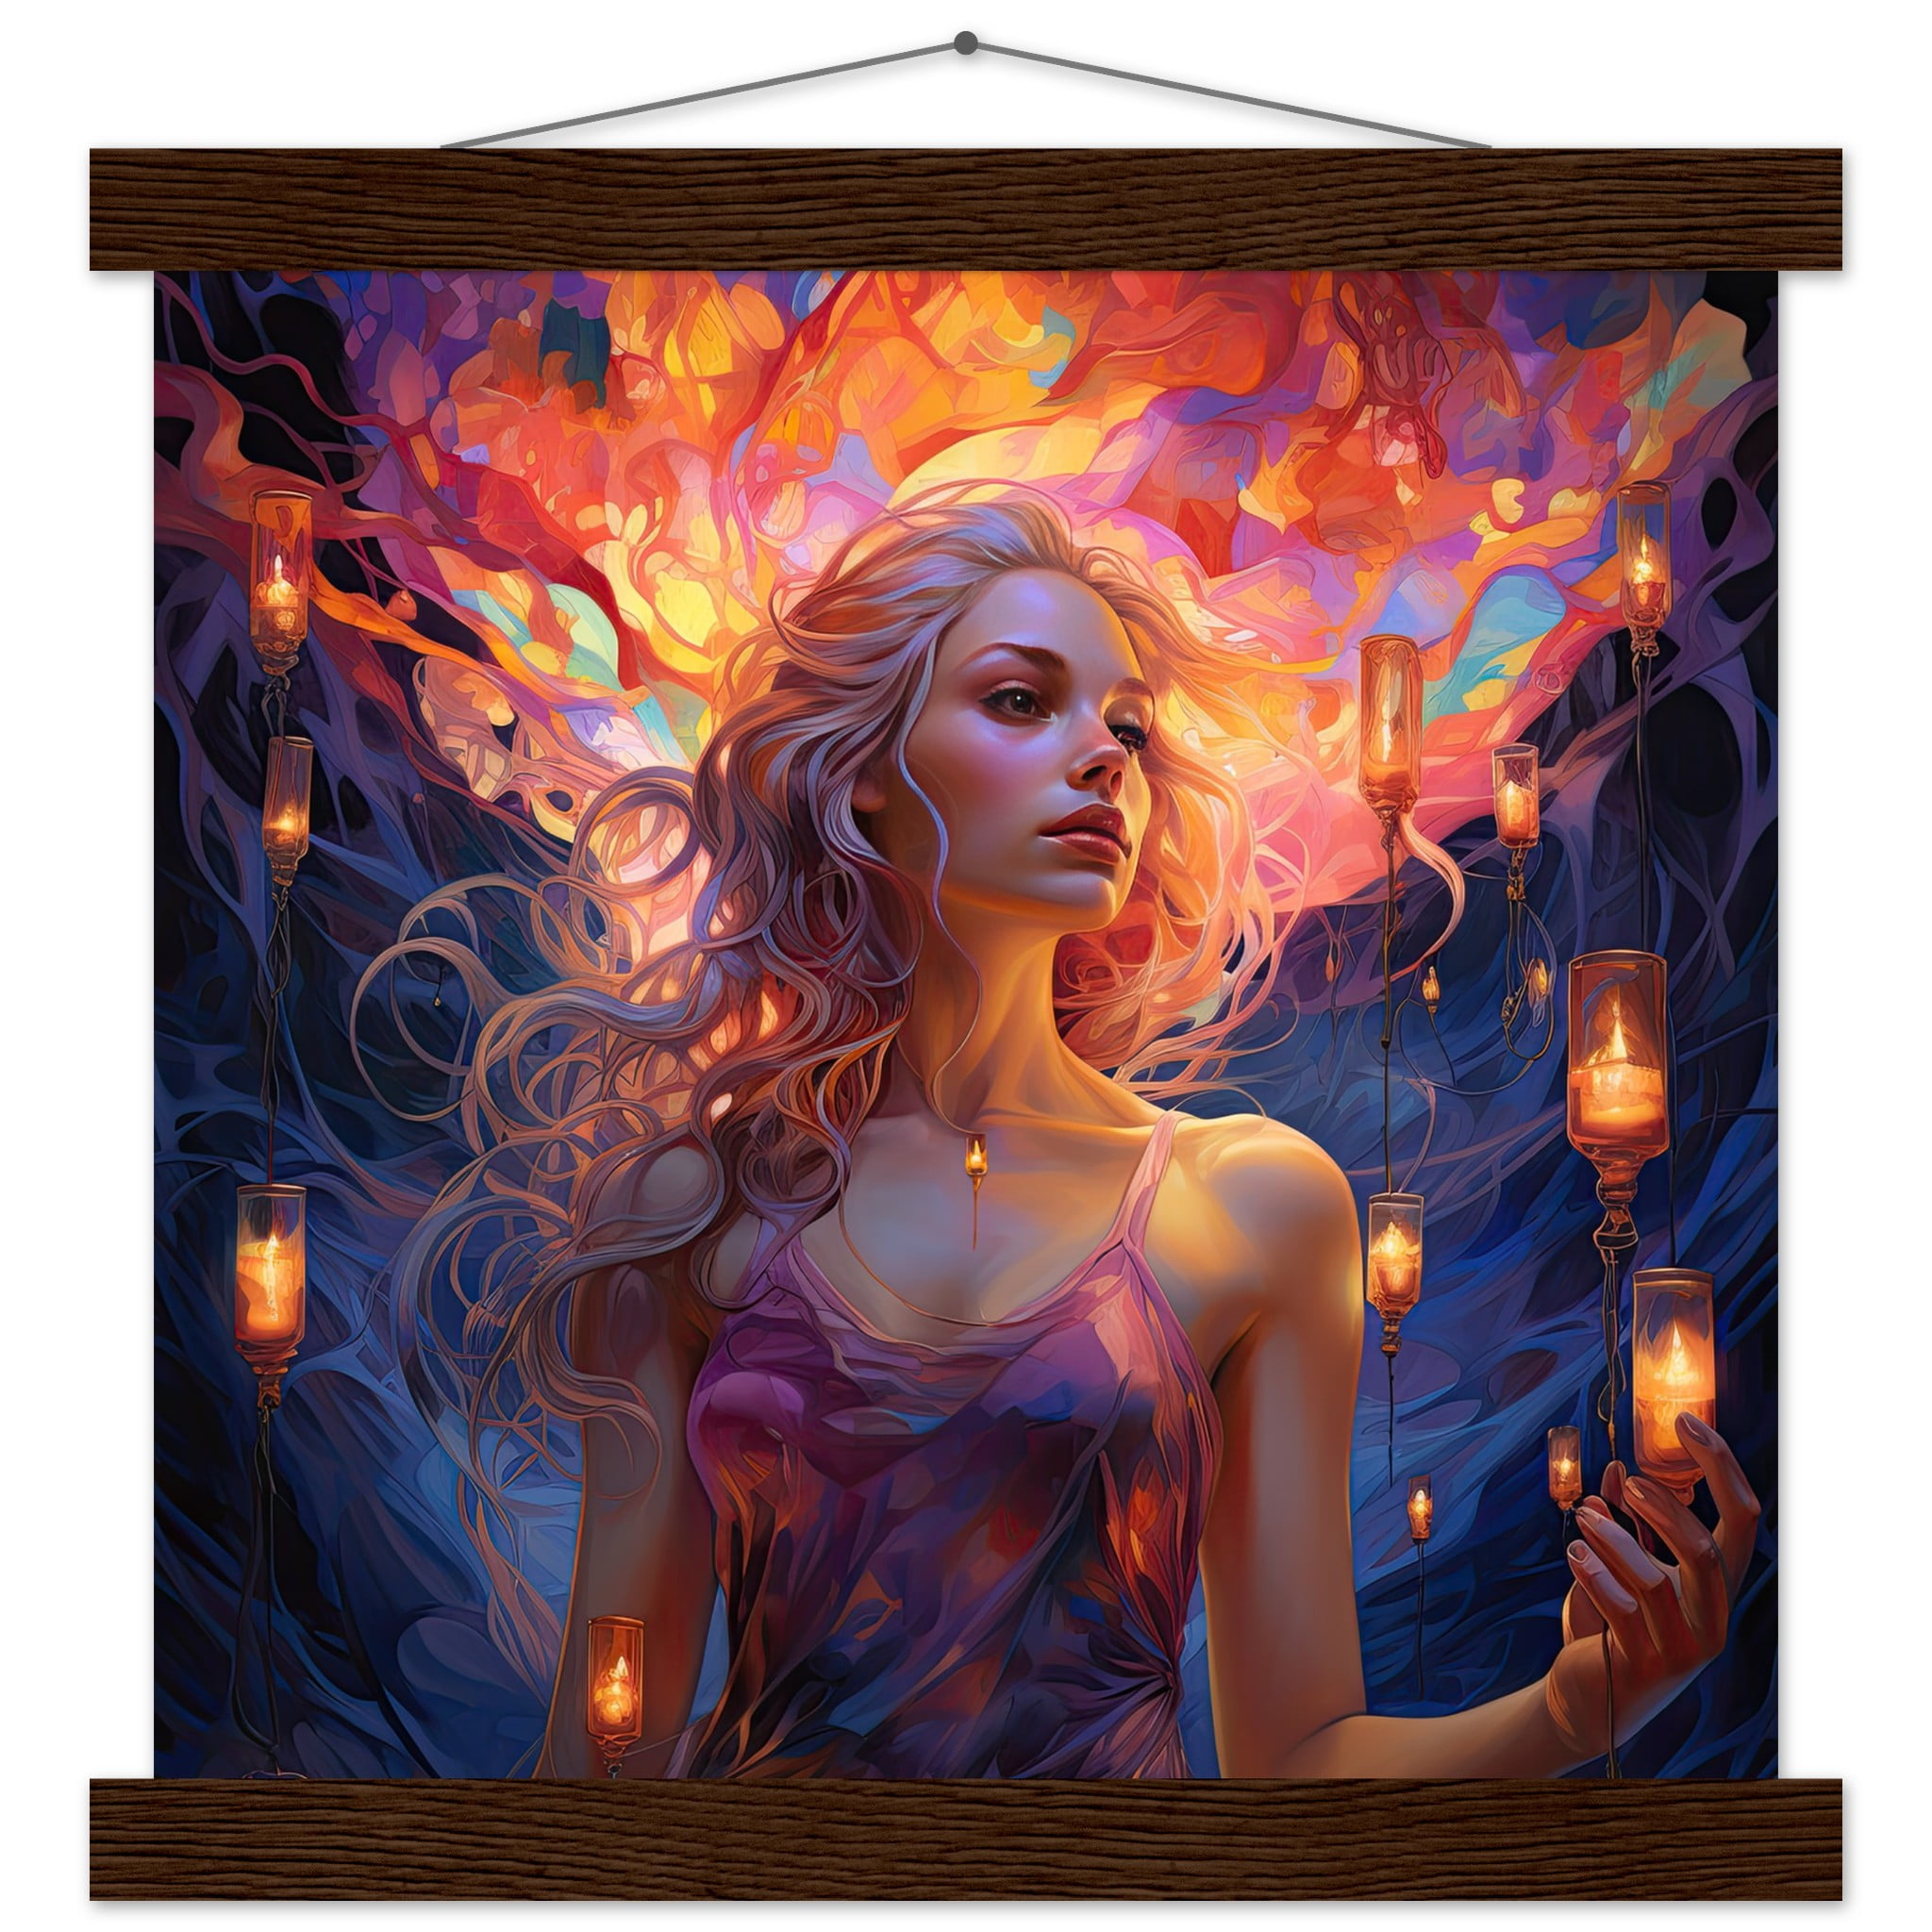 Lovely Lanterns and Colors Art Print with Hanger – 30×30 cm / 12×12″, Dark wood wall hanger